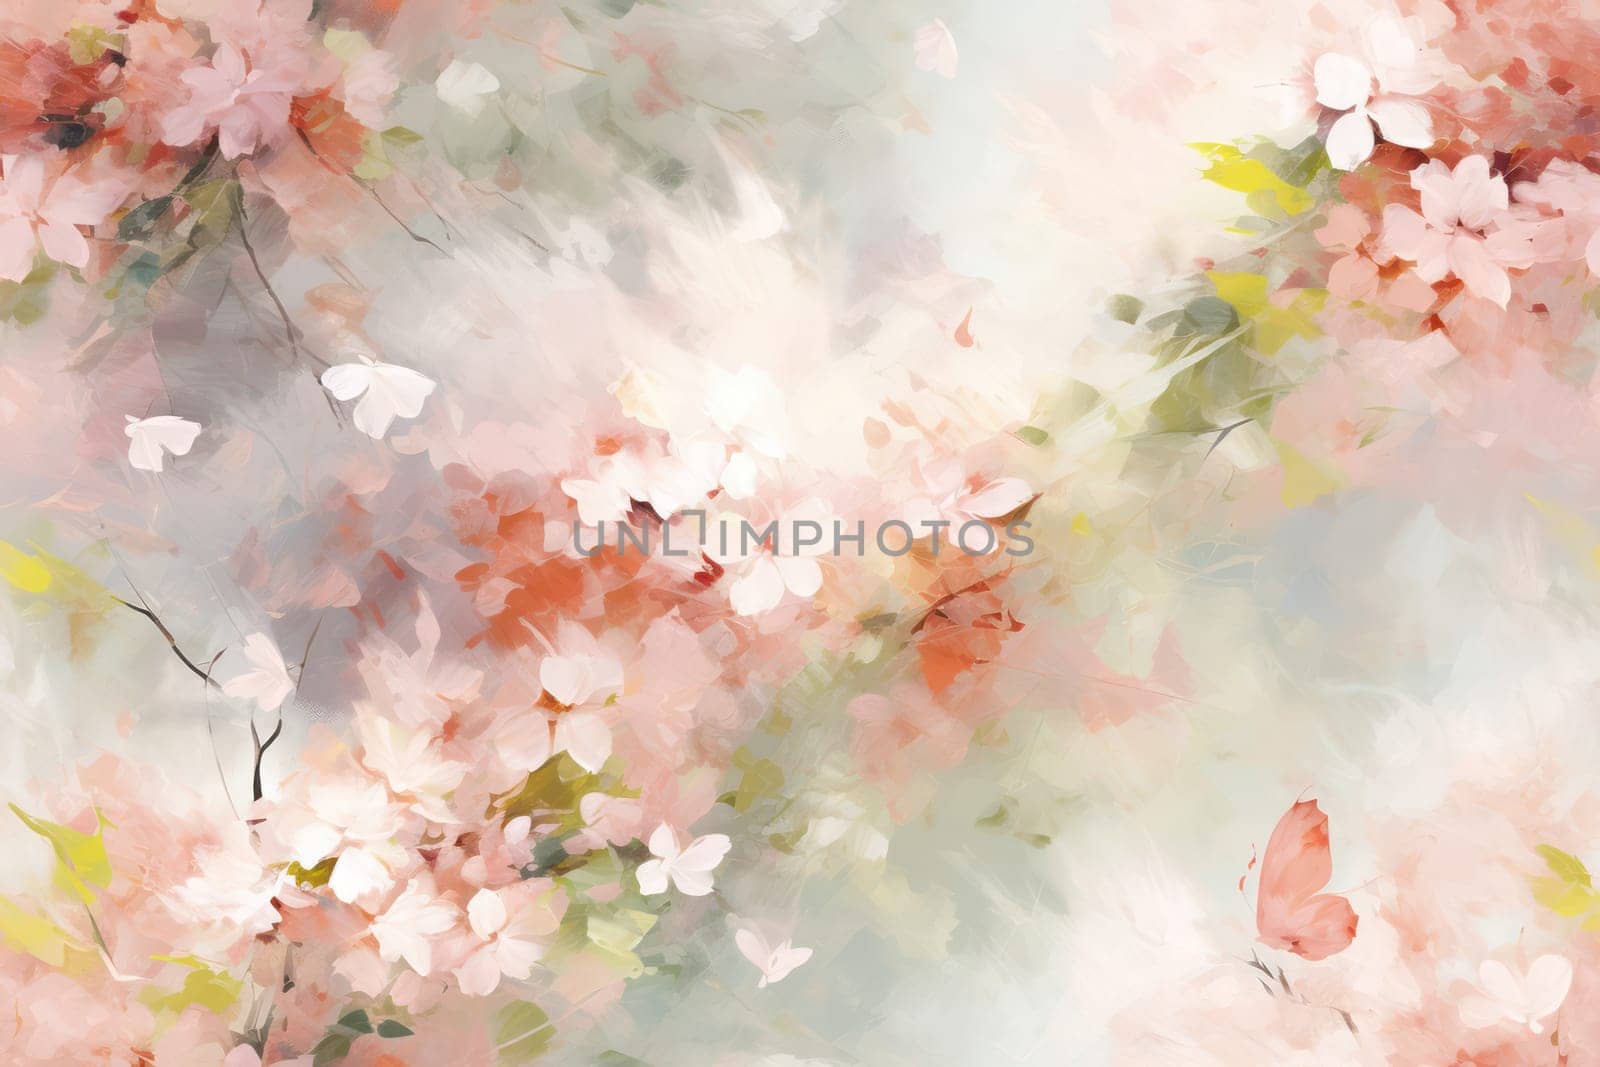 Abstract Watercolor Floral Painting: A Vibrant Blossom Bouquet on a Soft Pastel Pink and Blue Grunge Background. by Vichizh